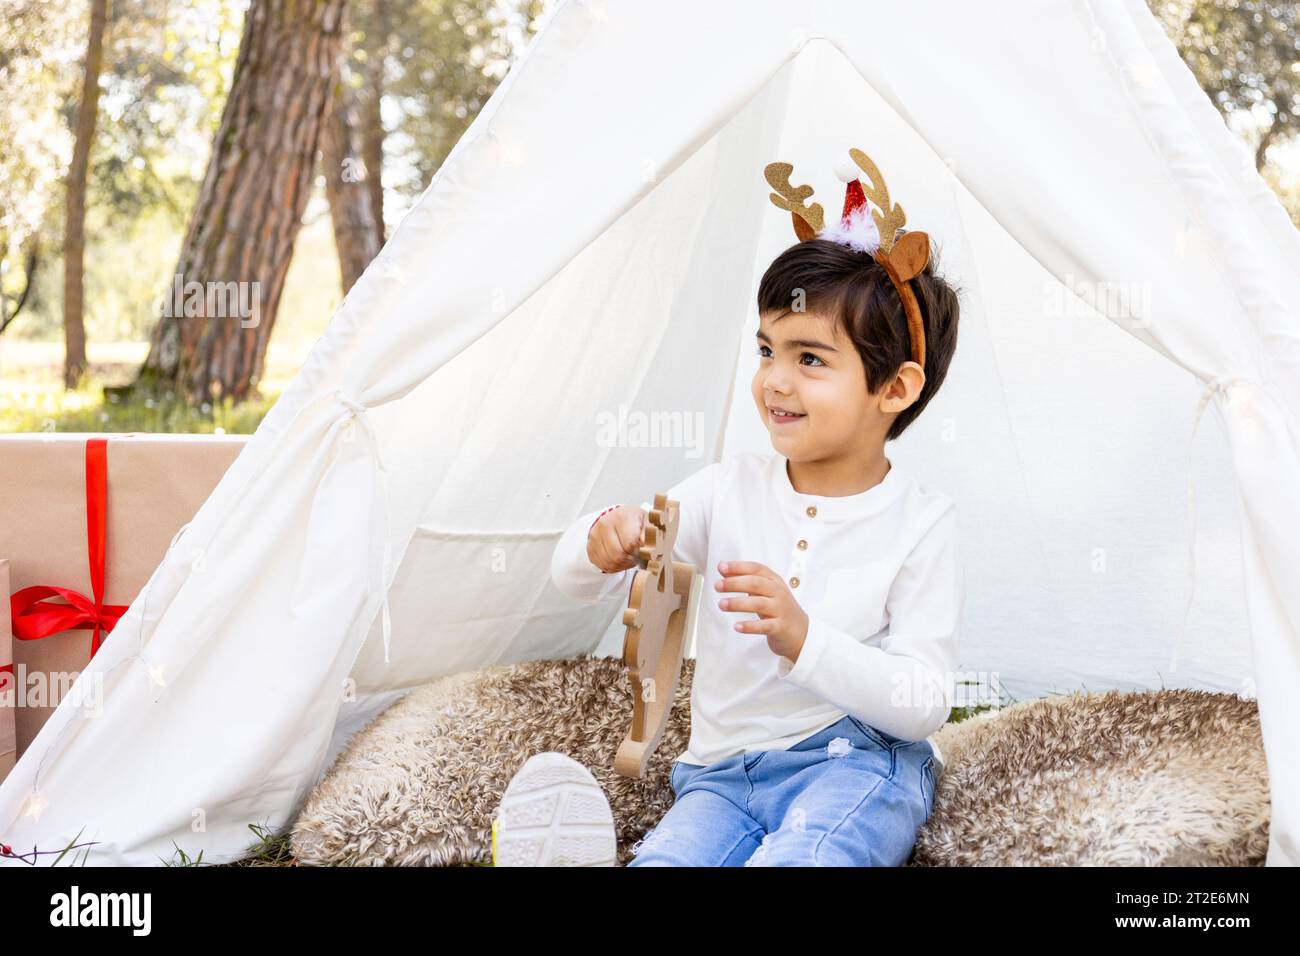 Smiling child boy playing with Christmas decoration in outdoor teepee tent with glitter reindeer antlers. Winter family photoshoot in the forest. Stock Photo